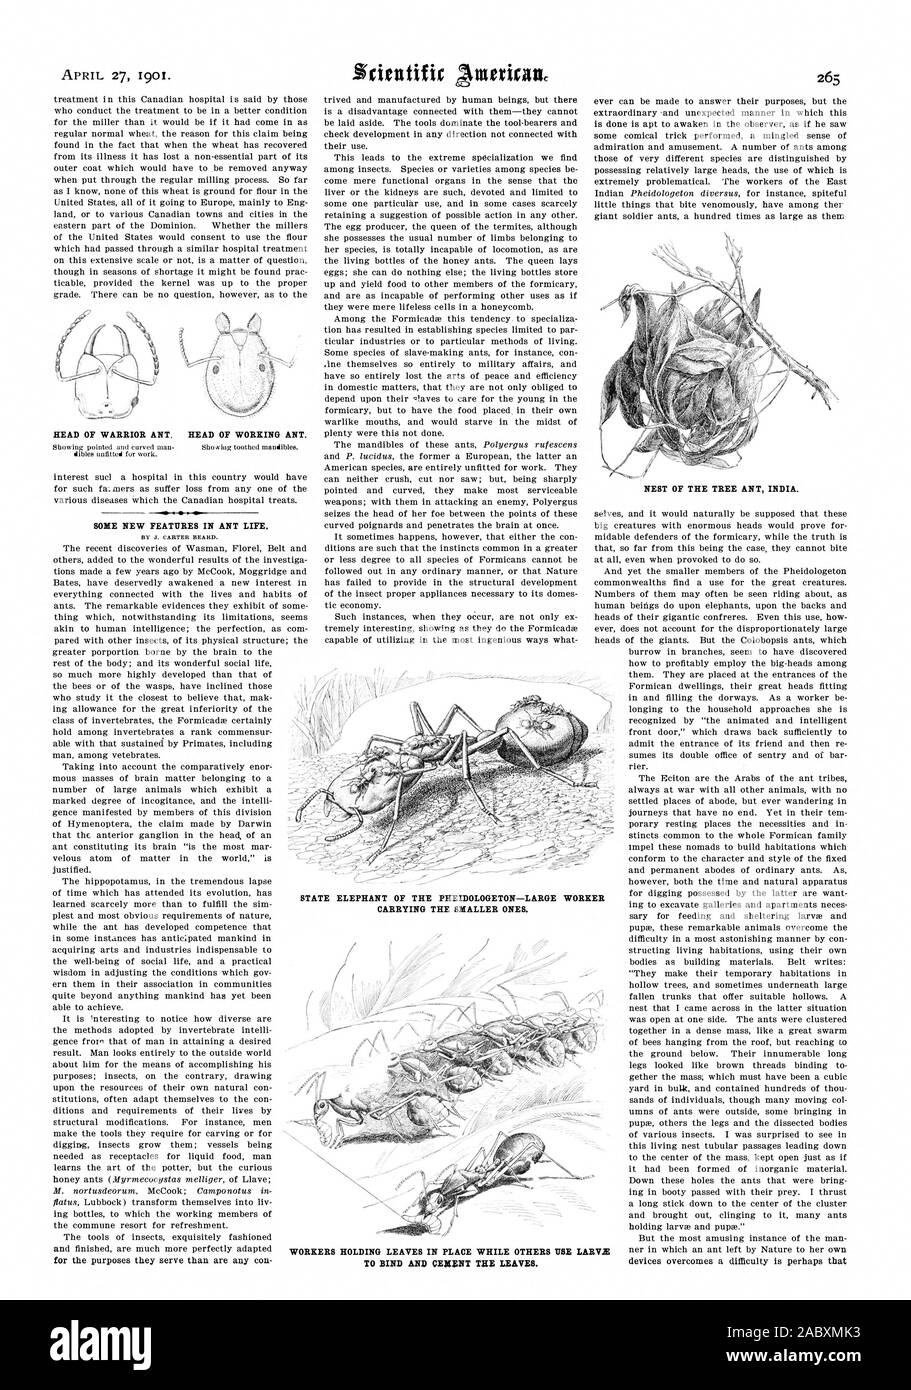 BY J. CARTER BEARD. NEST OF THE TREE ANT INDIA., scientific american, 1901-04-27 Stock Photo